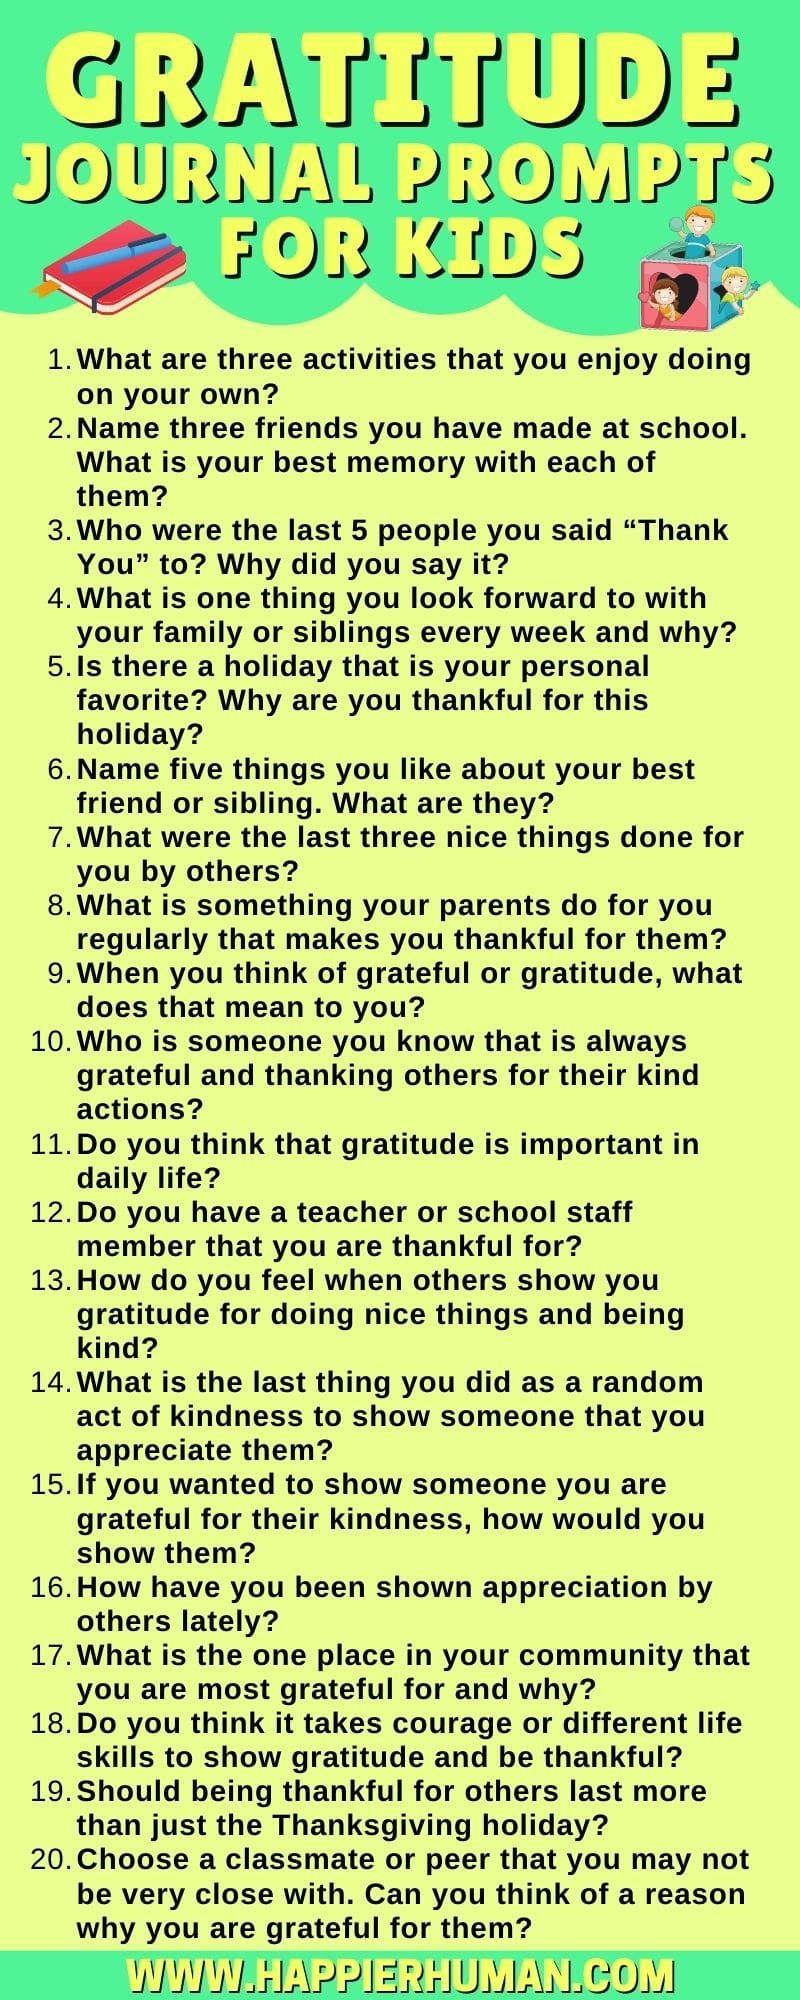 75-gratitude-journal-prompts-for-kids-to-be-more-thankful-happier-human